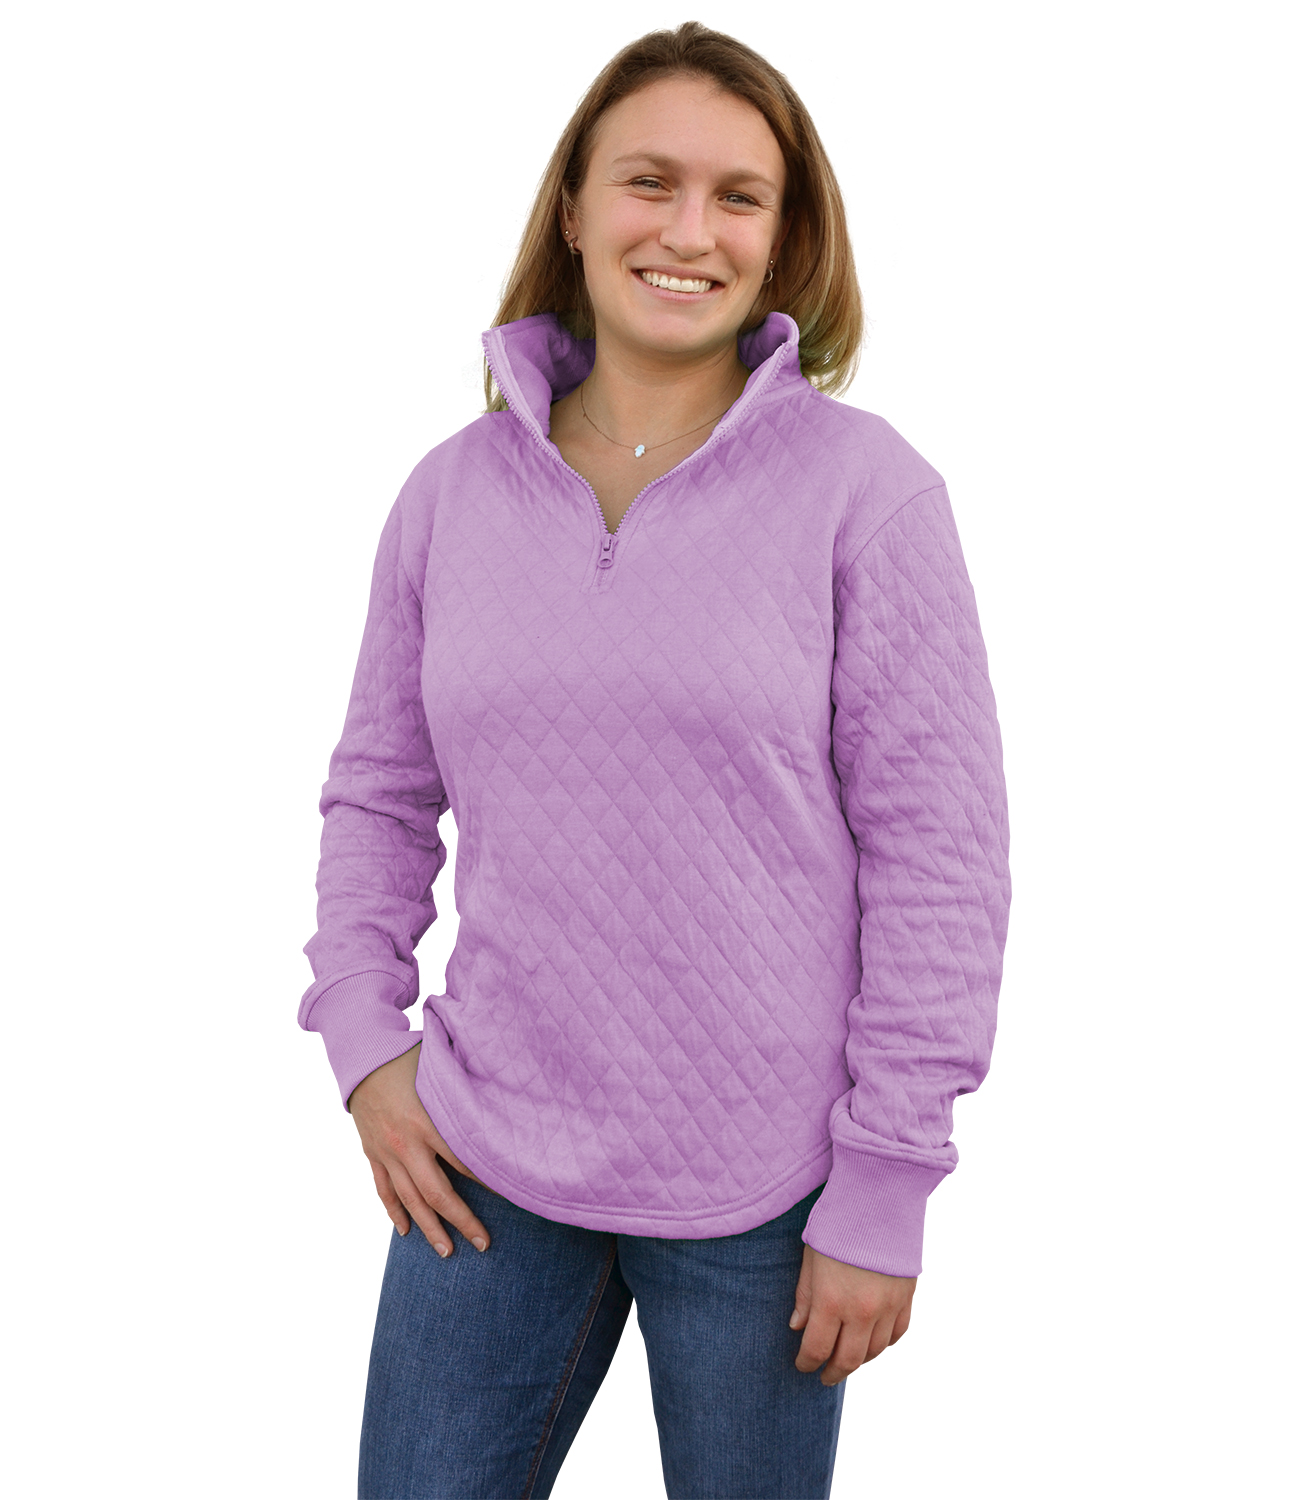 womens quilted fleece, quarter zip blanks for embroidery wholesale, renegade club purple